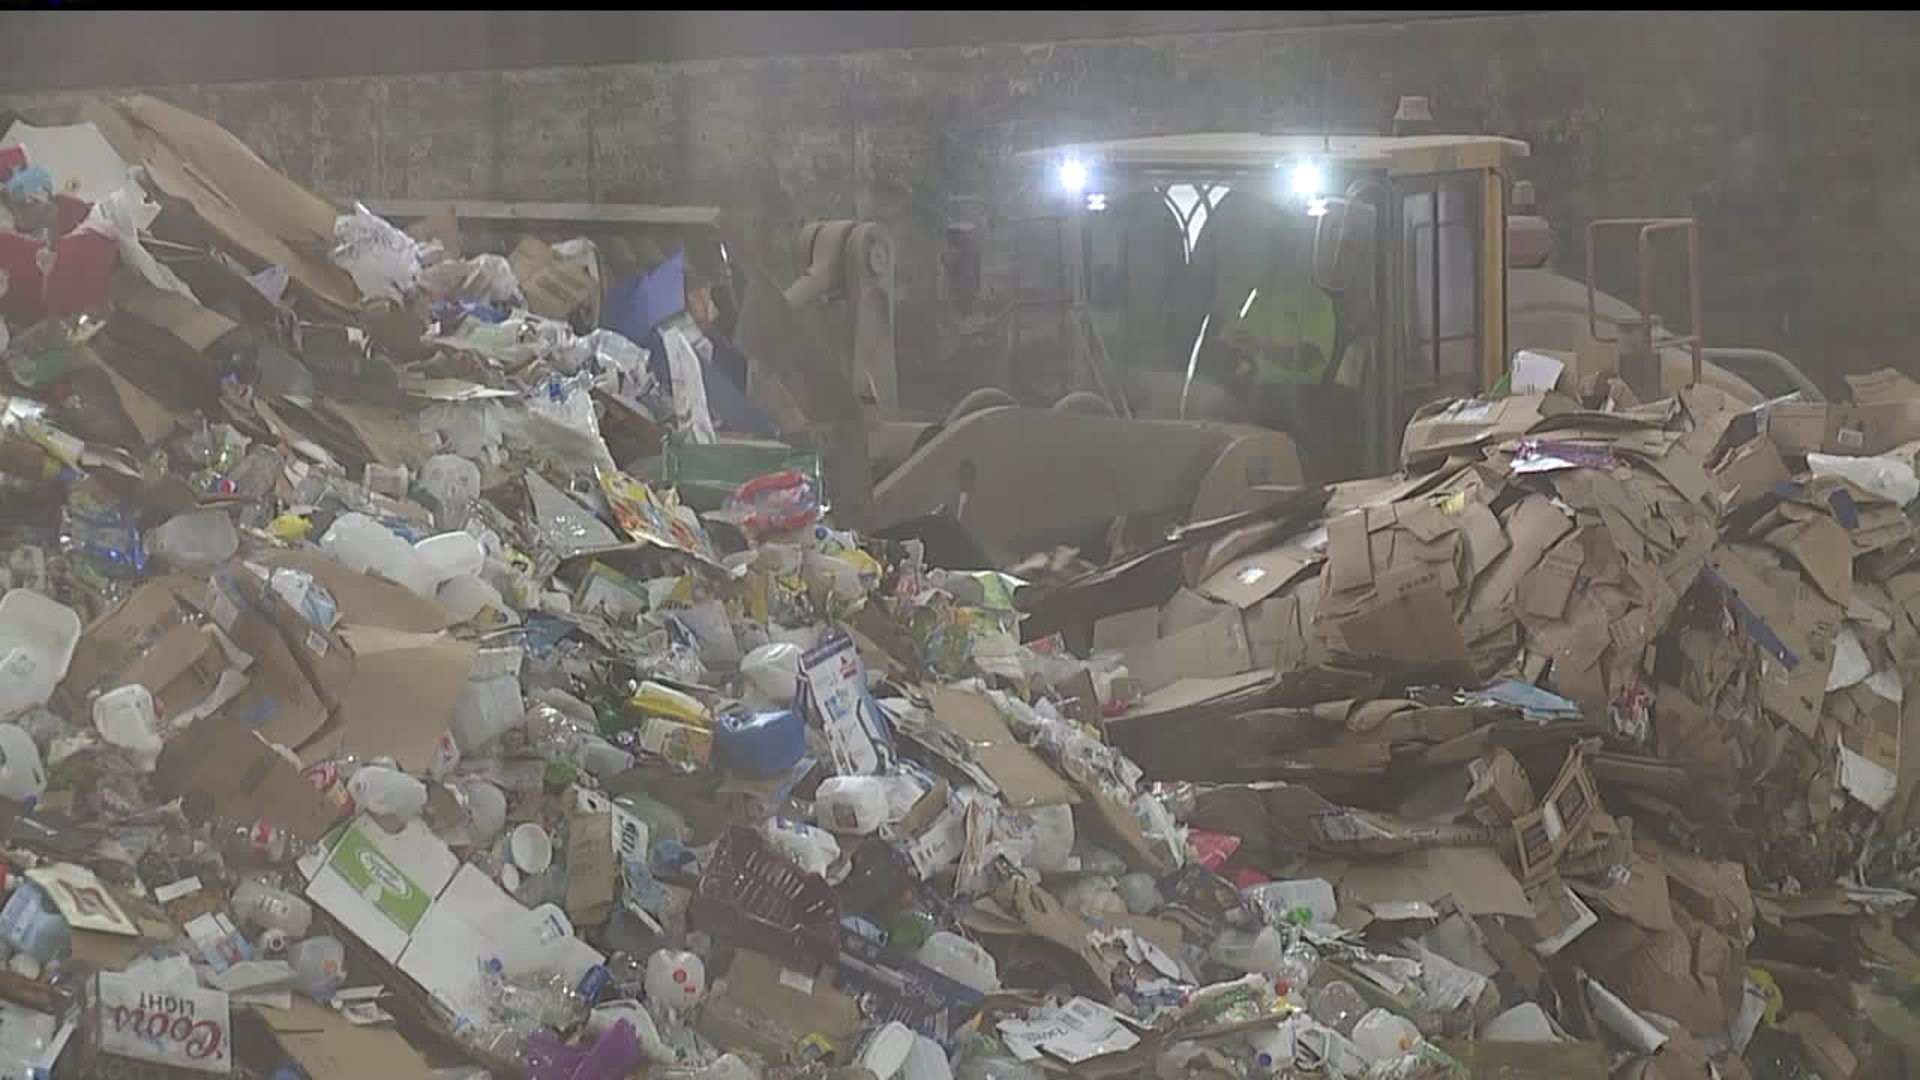 If you`re not recycling right, it could be costing you and your neighbors money